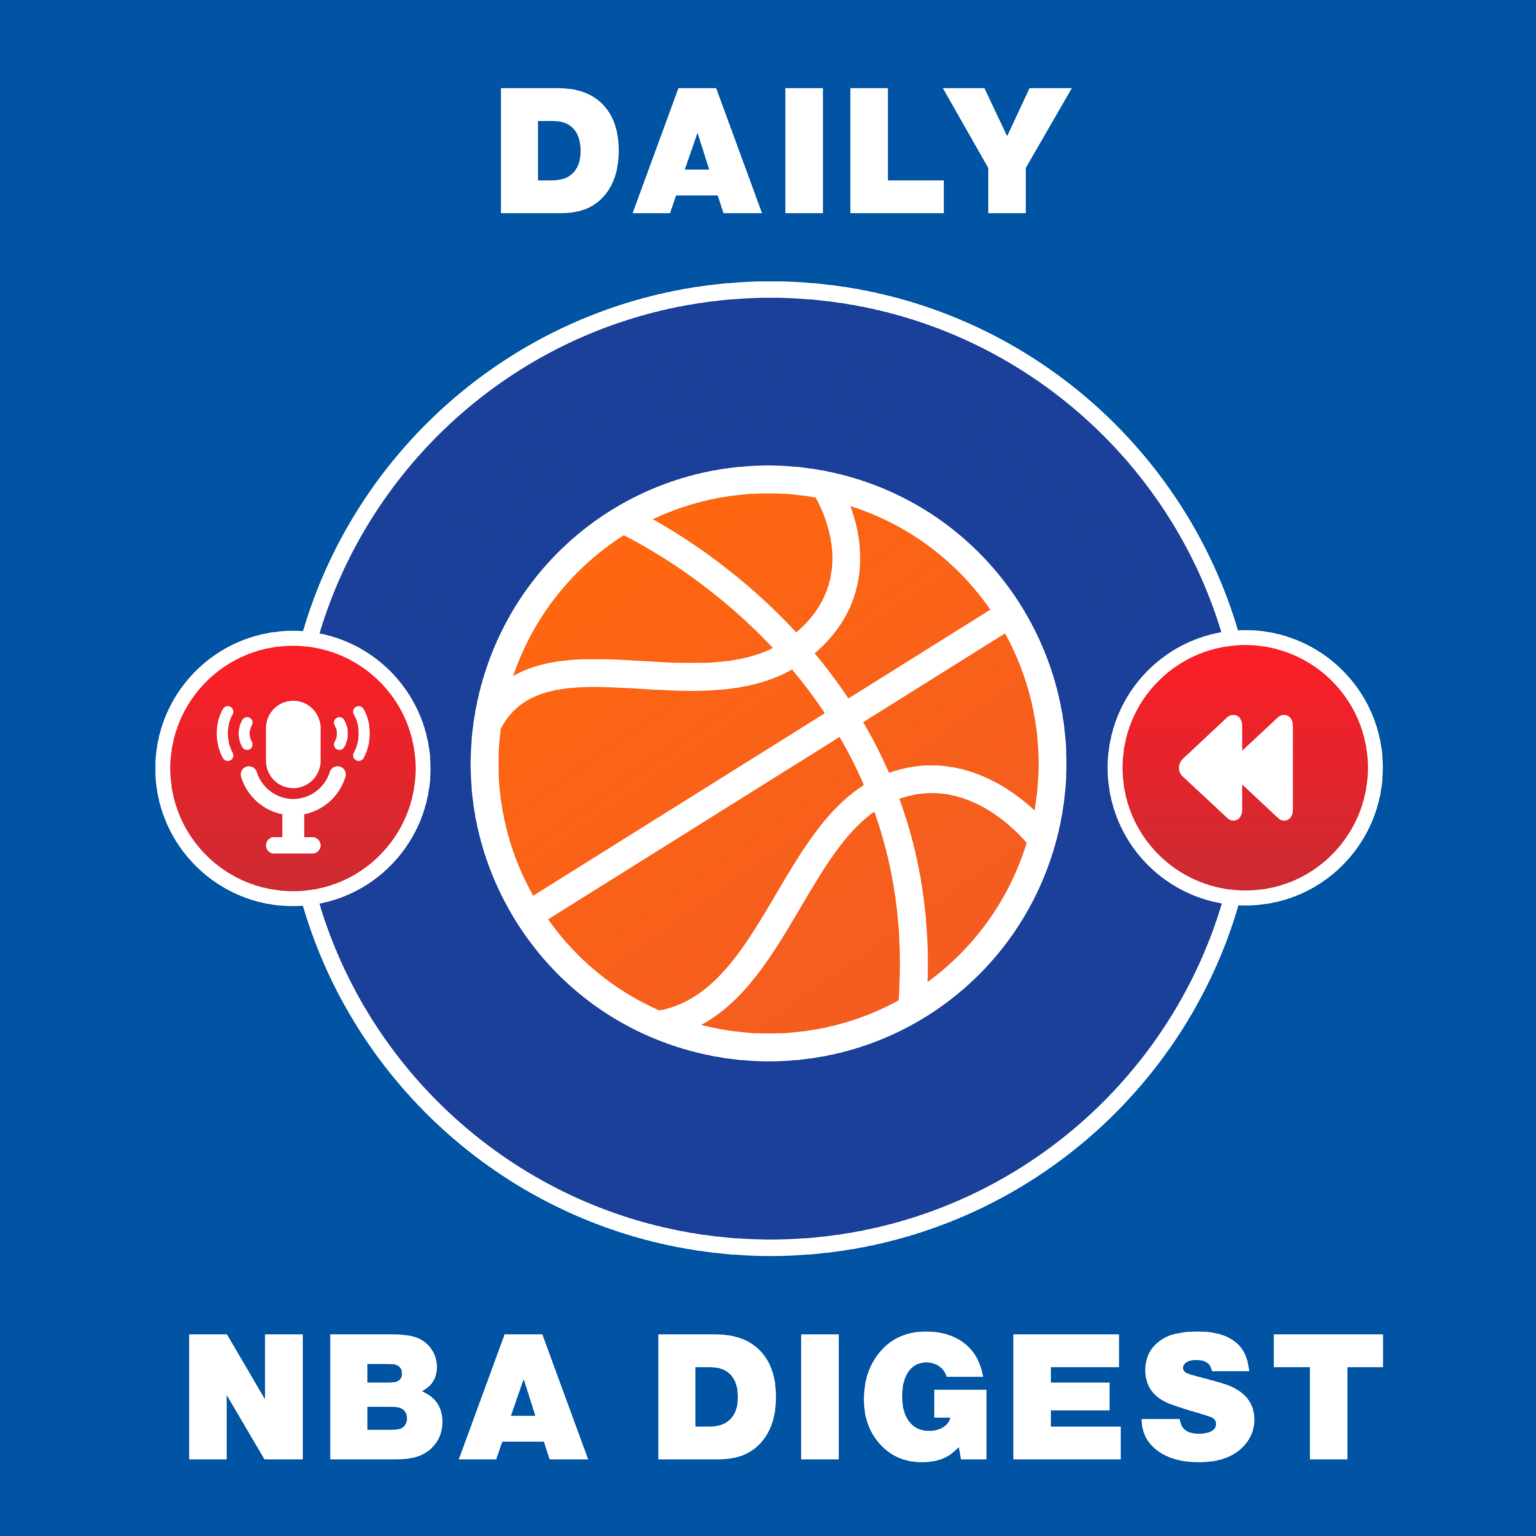 A round up of the previous day's NBA results with the key player from each game.